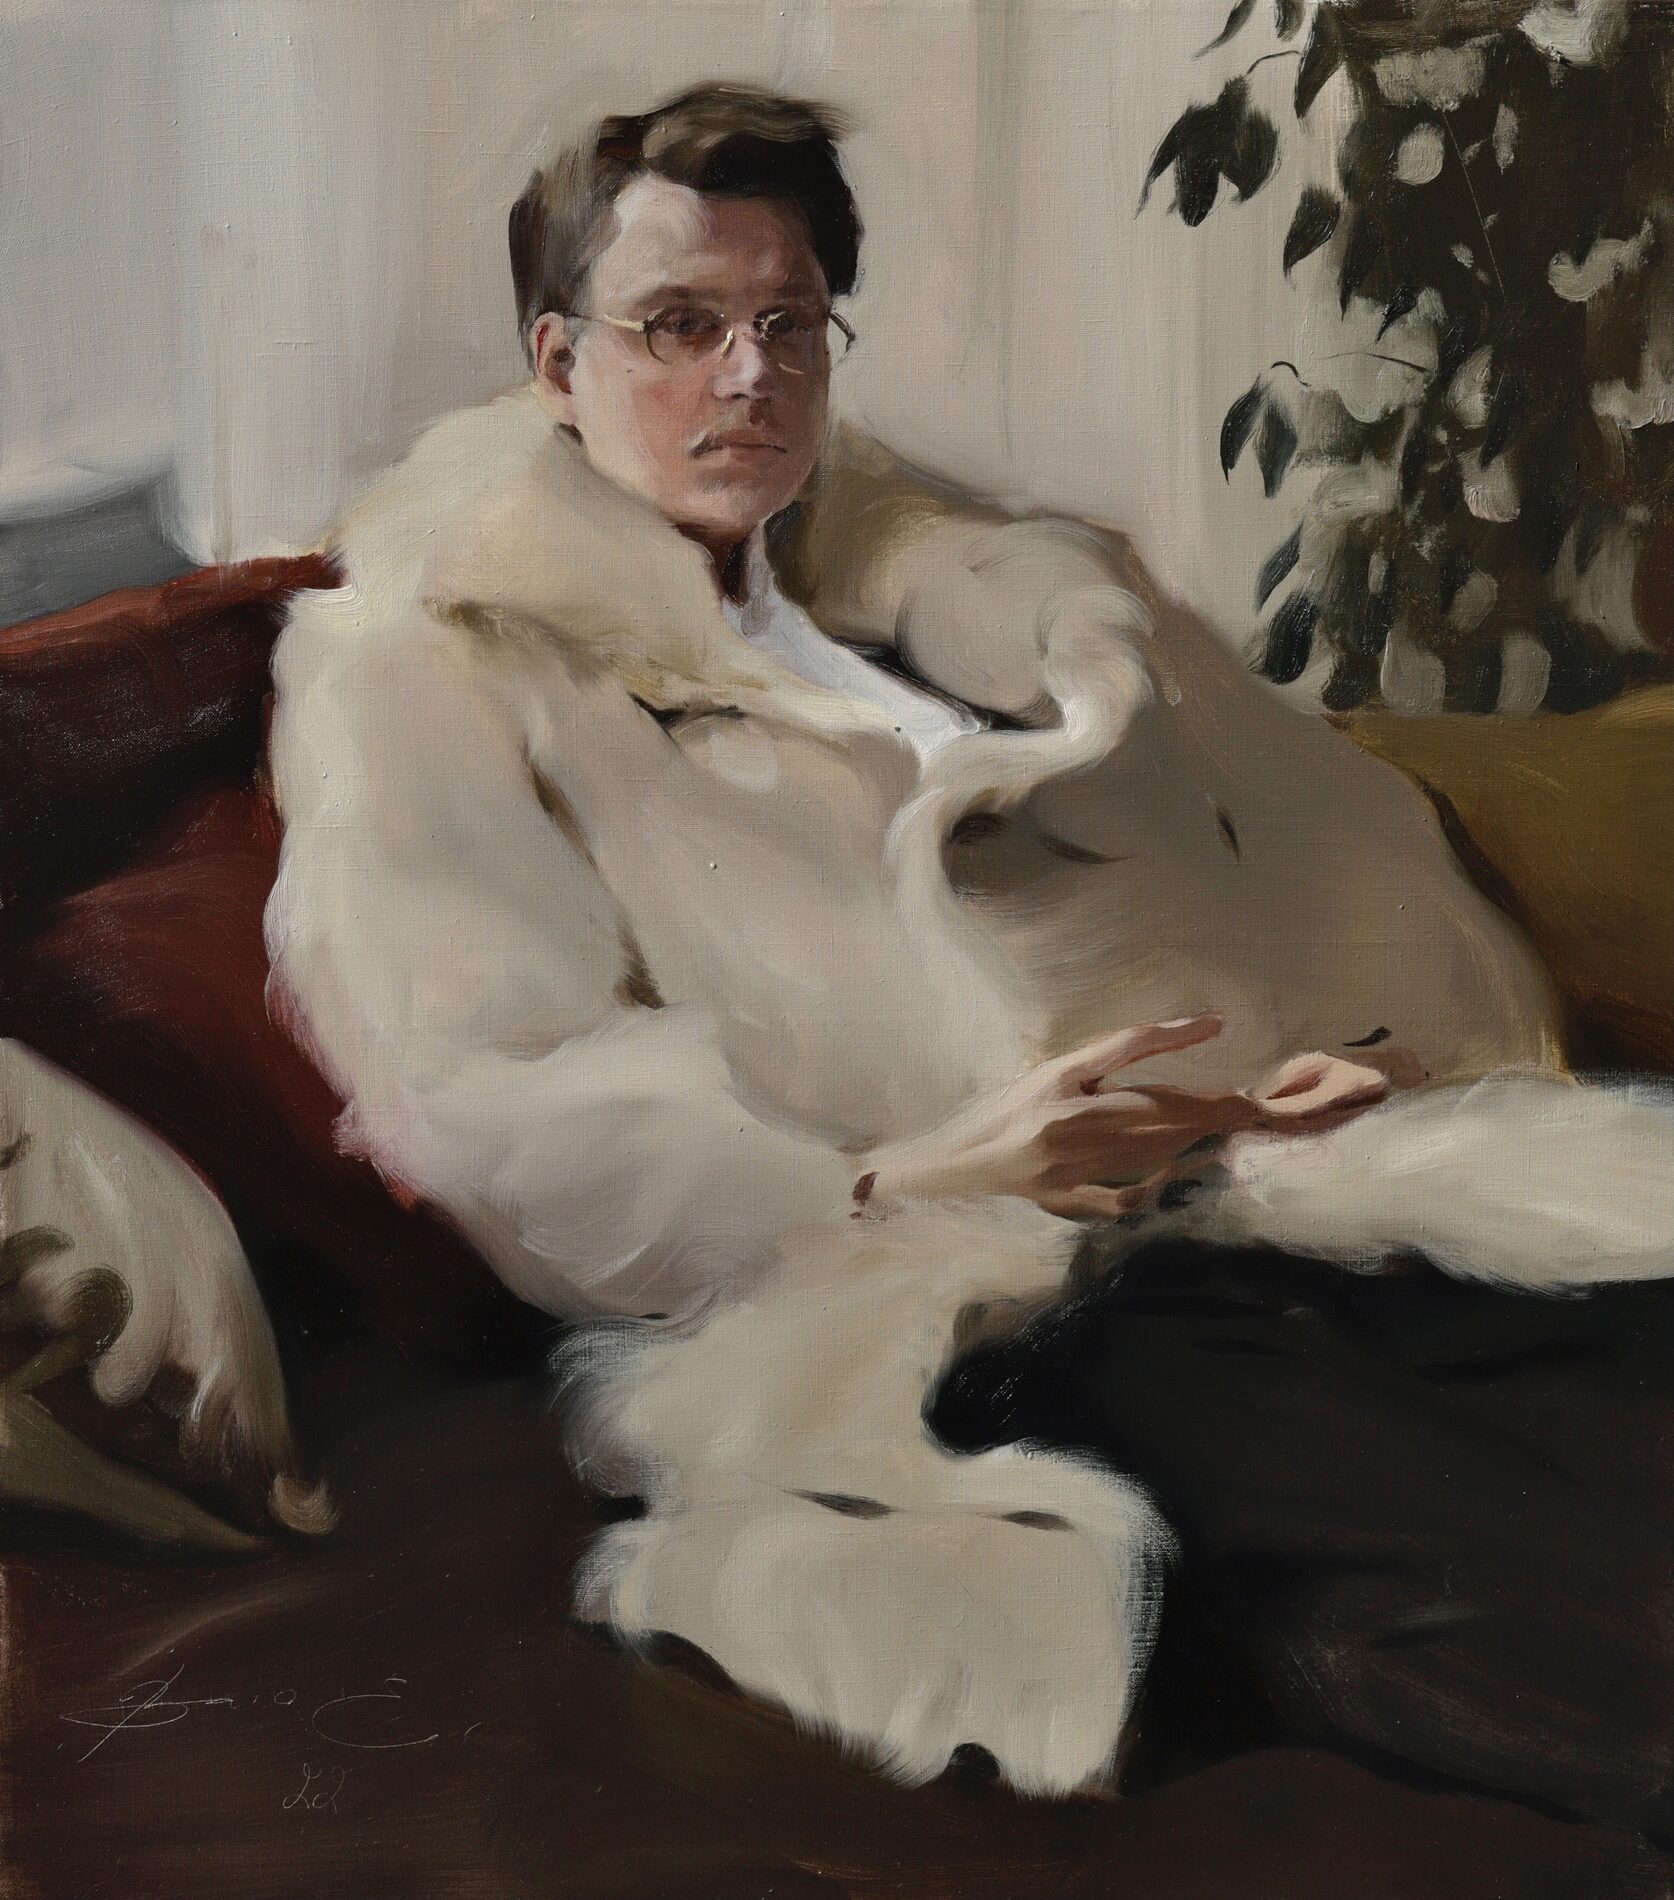 A man in a white fur coat and glasses sits on a couch.